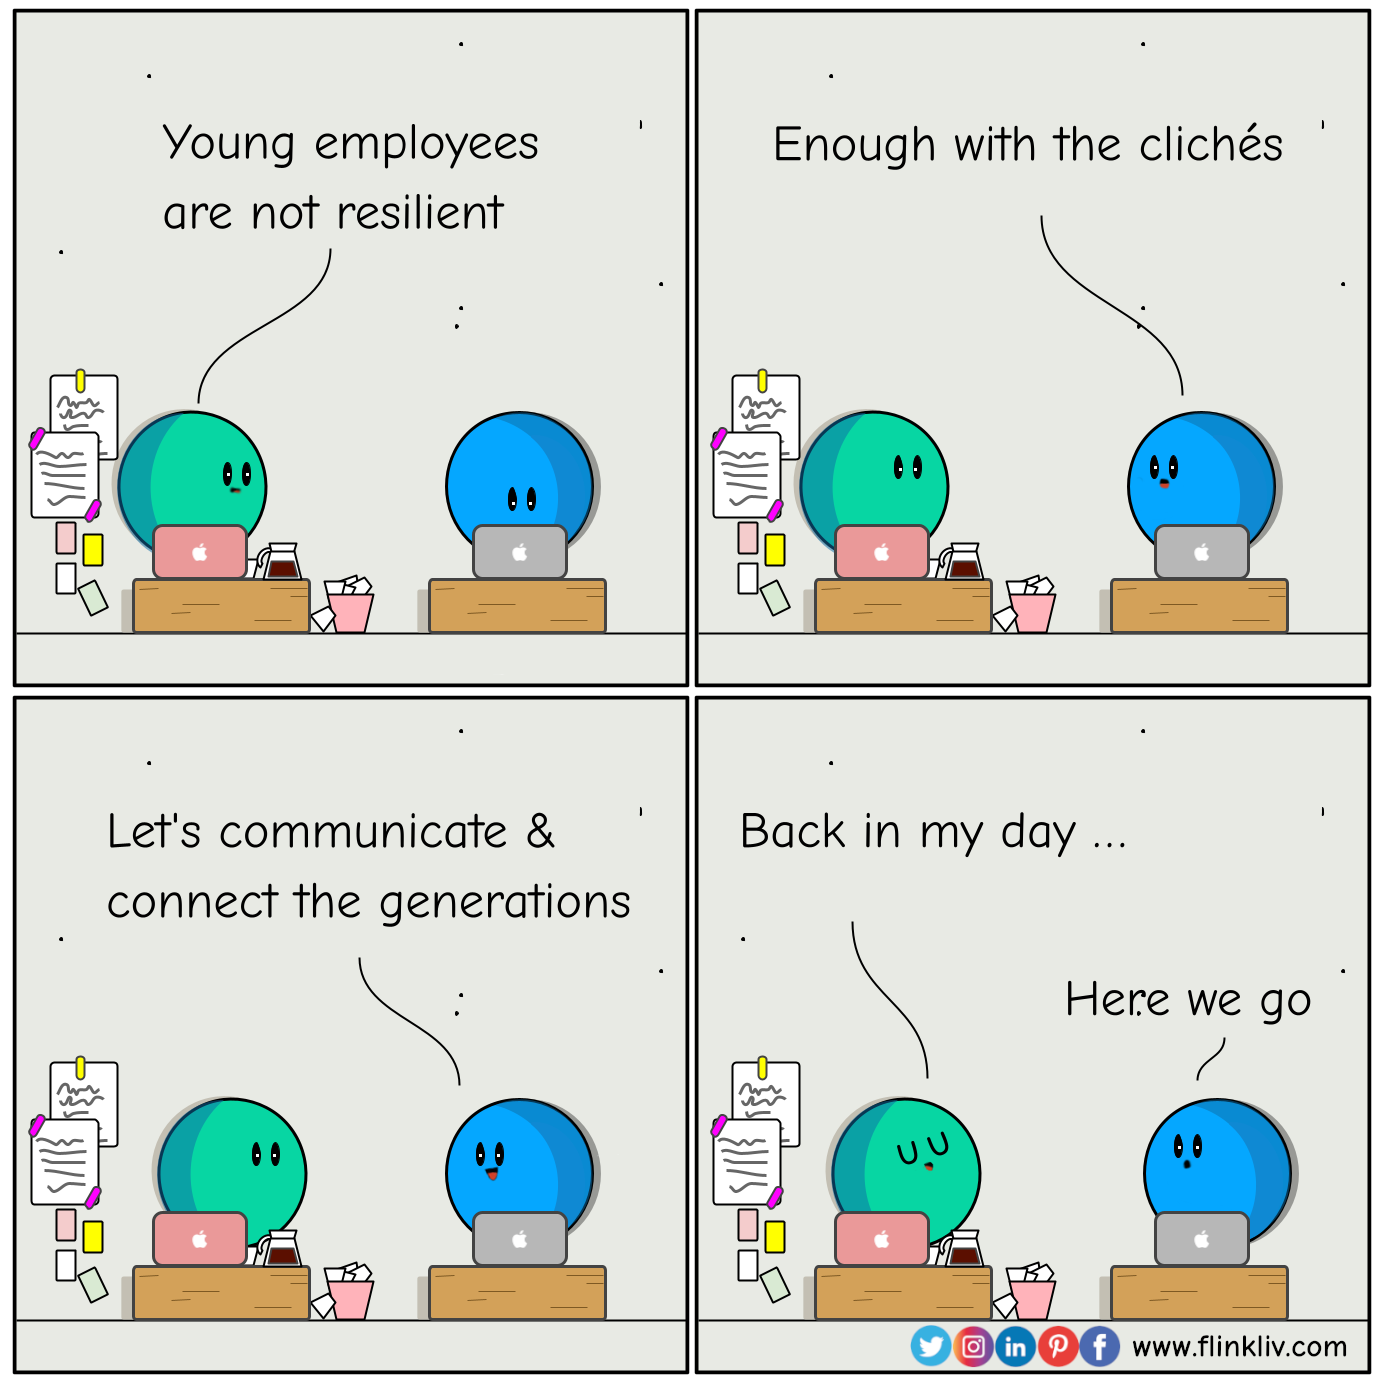 Conversation between A and B about resilience A: Young employees are not resilient B: Enough with the clichés B: Let's communicate and connect the generations. A: Back in my day ... B: Here we go. By flinkliv.com